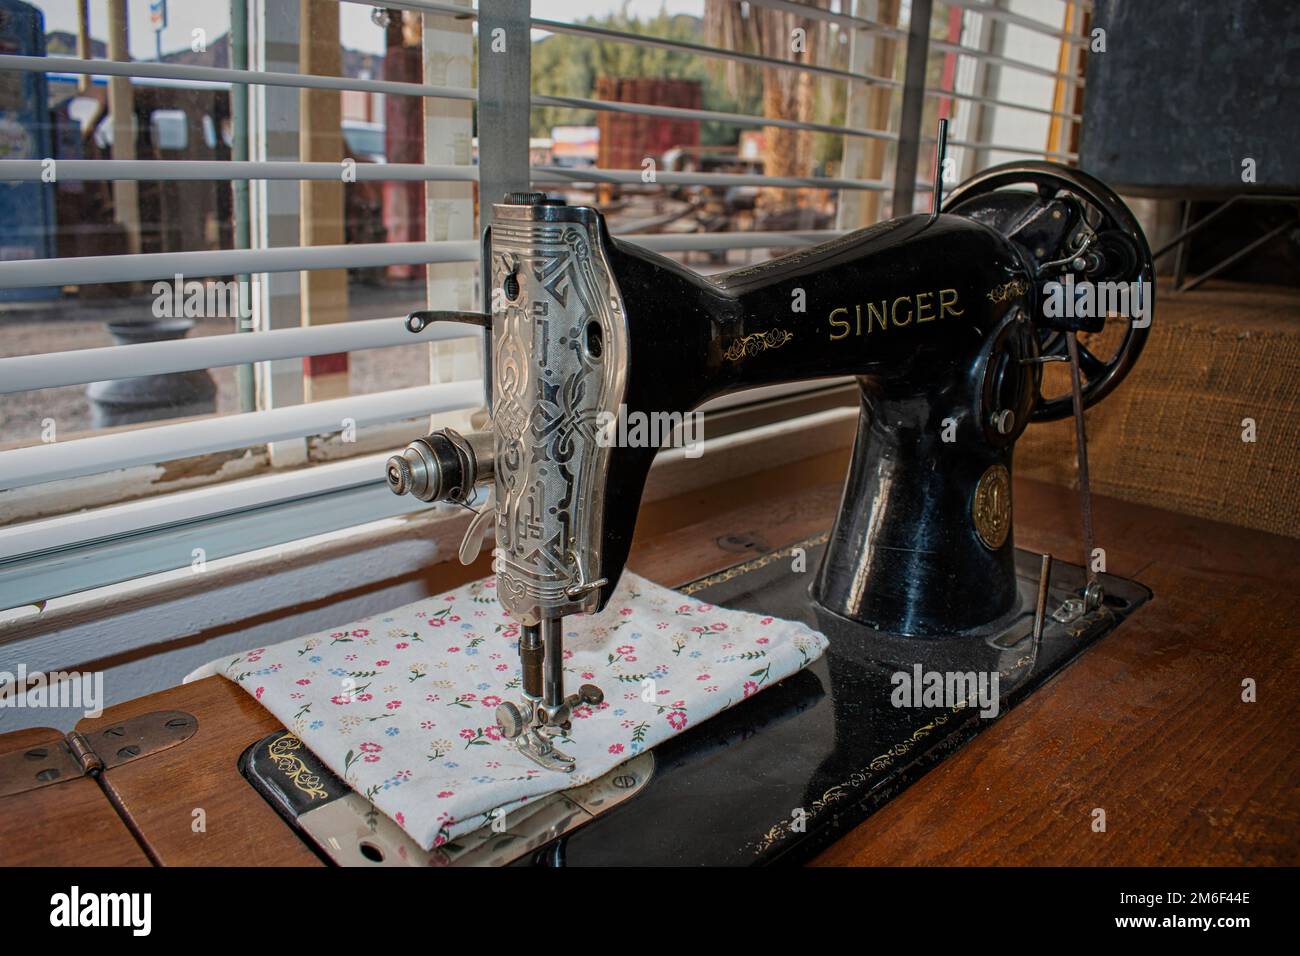 An Old Singer sewing machine near a window Stock Photo